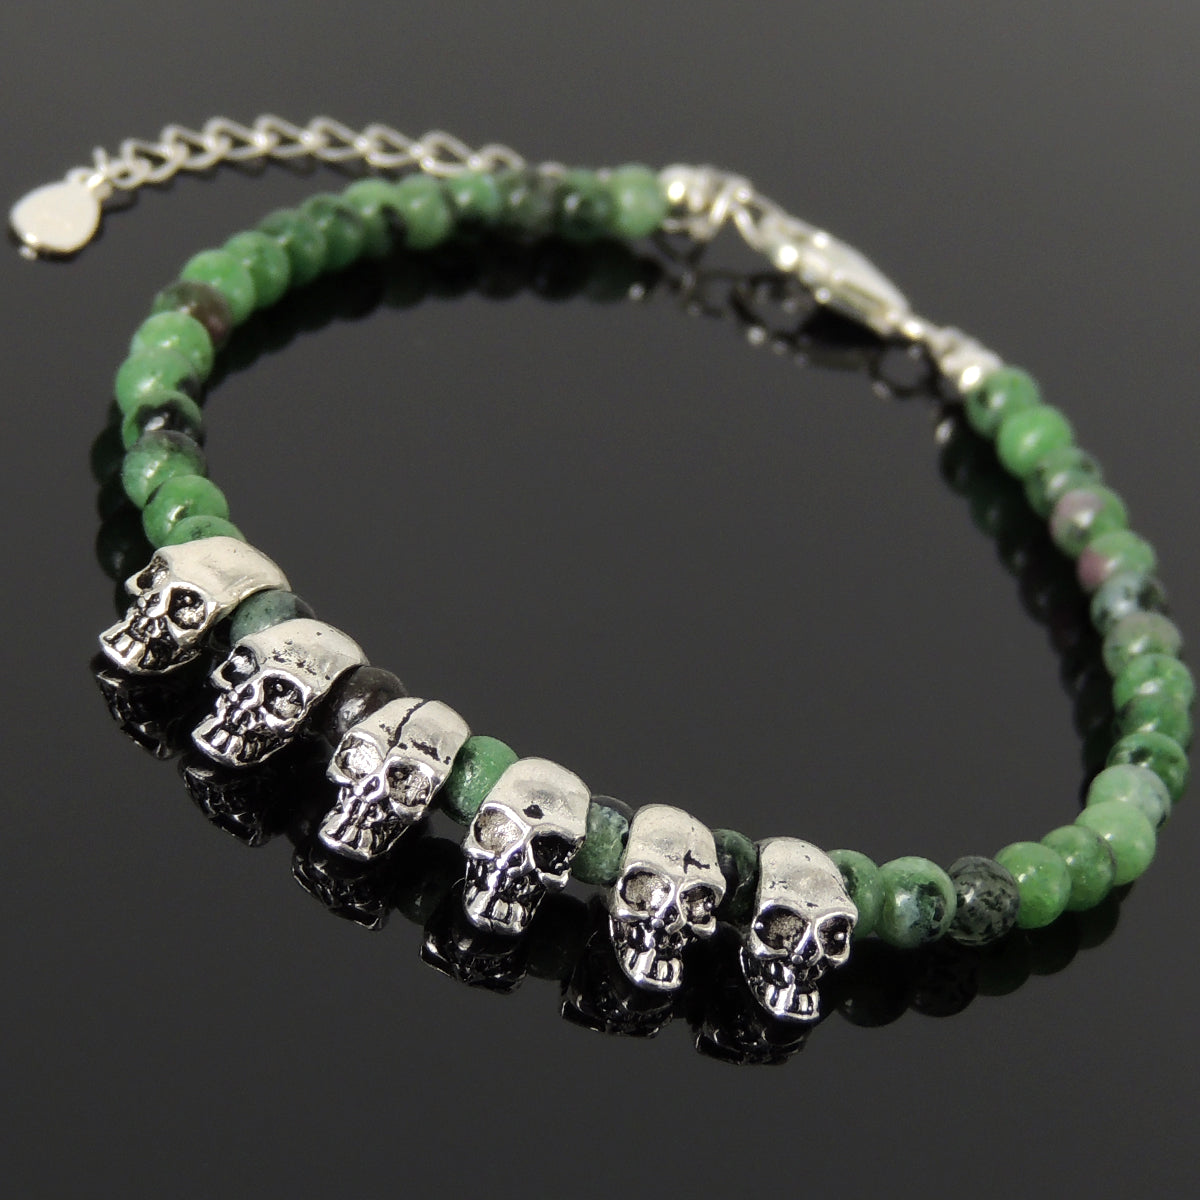 4mm Epidote Healing Gemstone Bracelet with S925 Sterling Silver Small Protection Skull Beads, Chain, & Clasp - Handmade by Gem & Silver BR1451